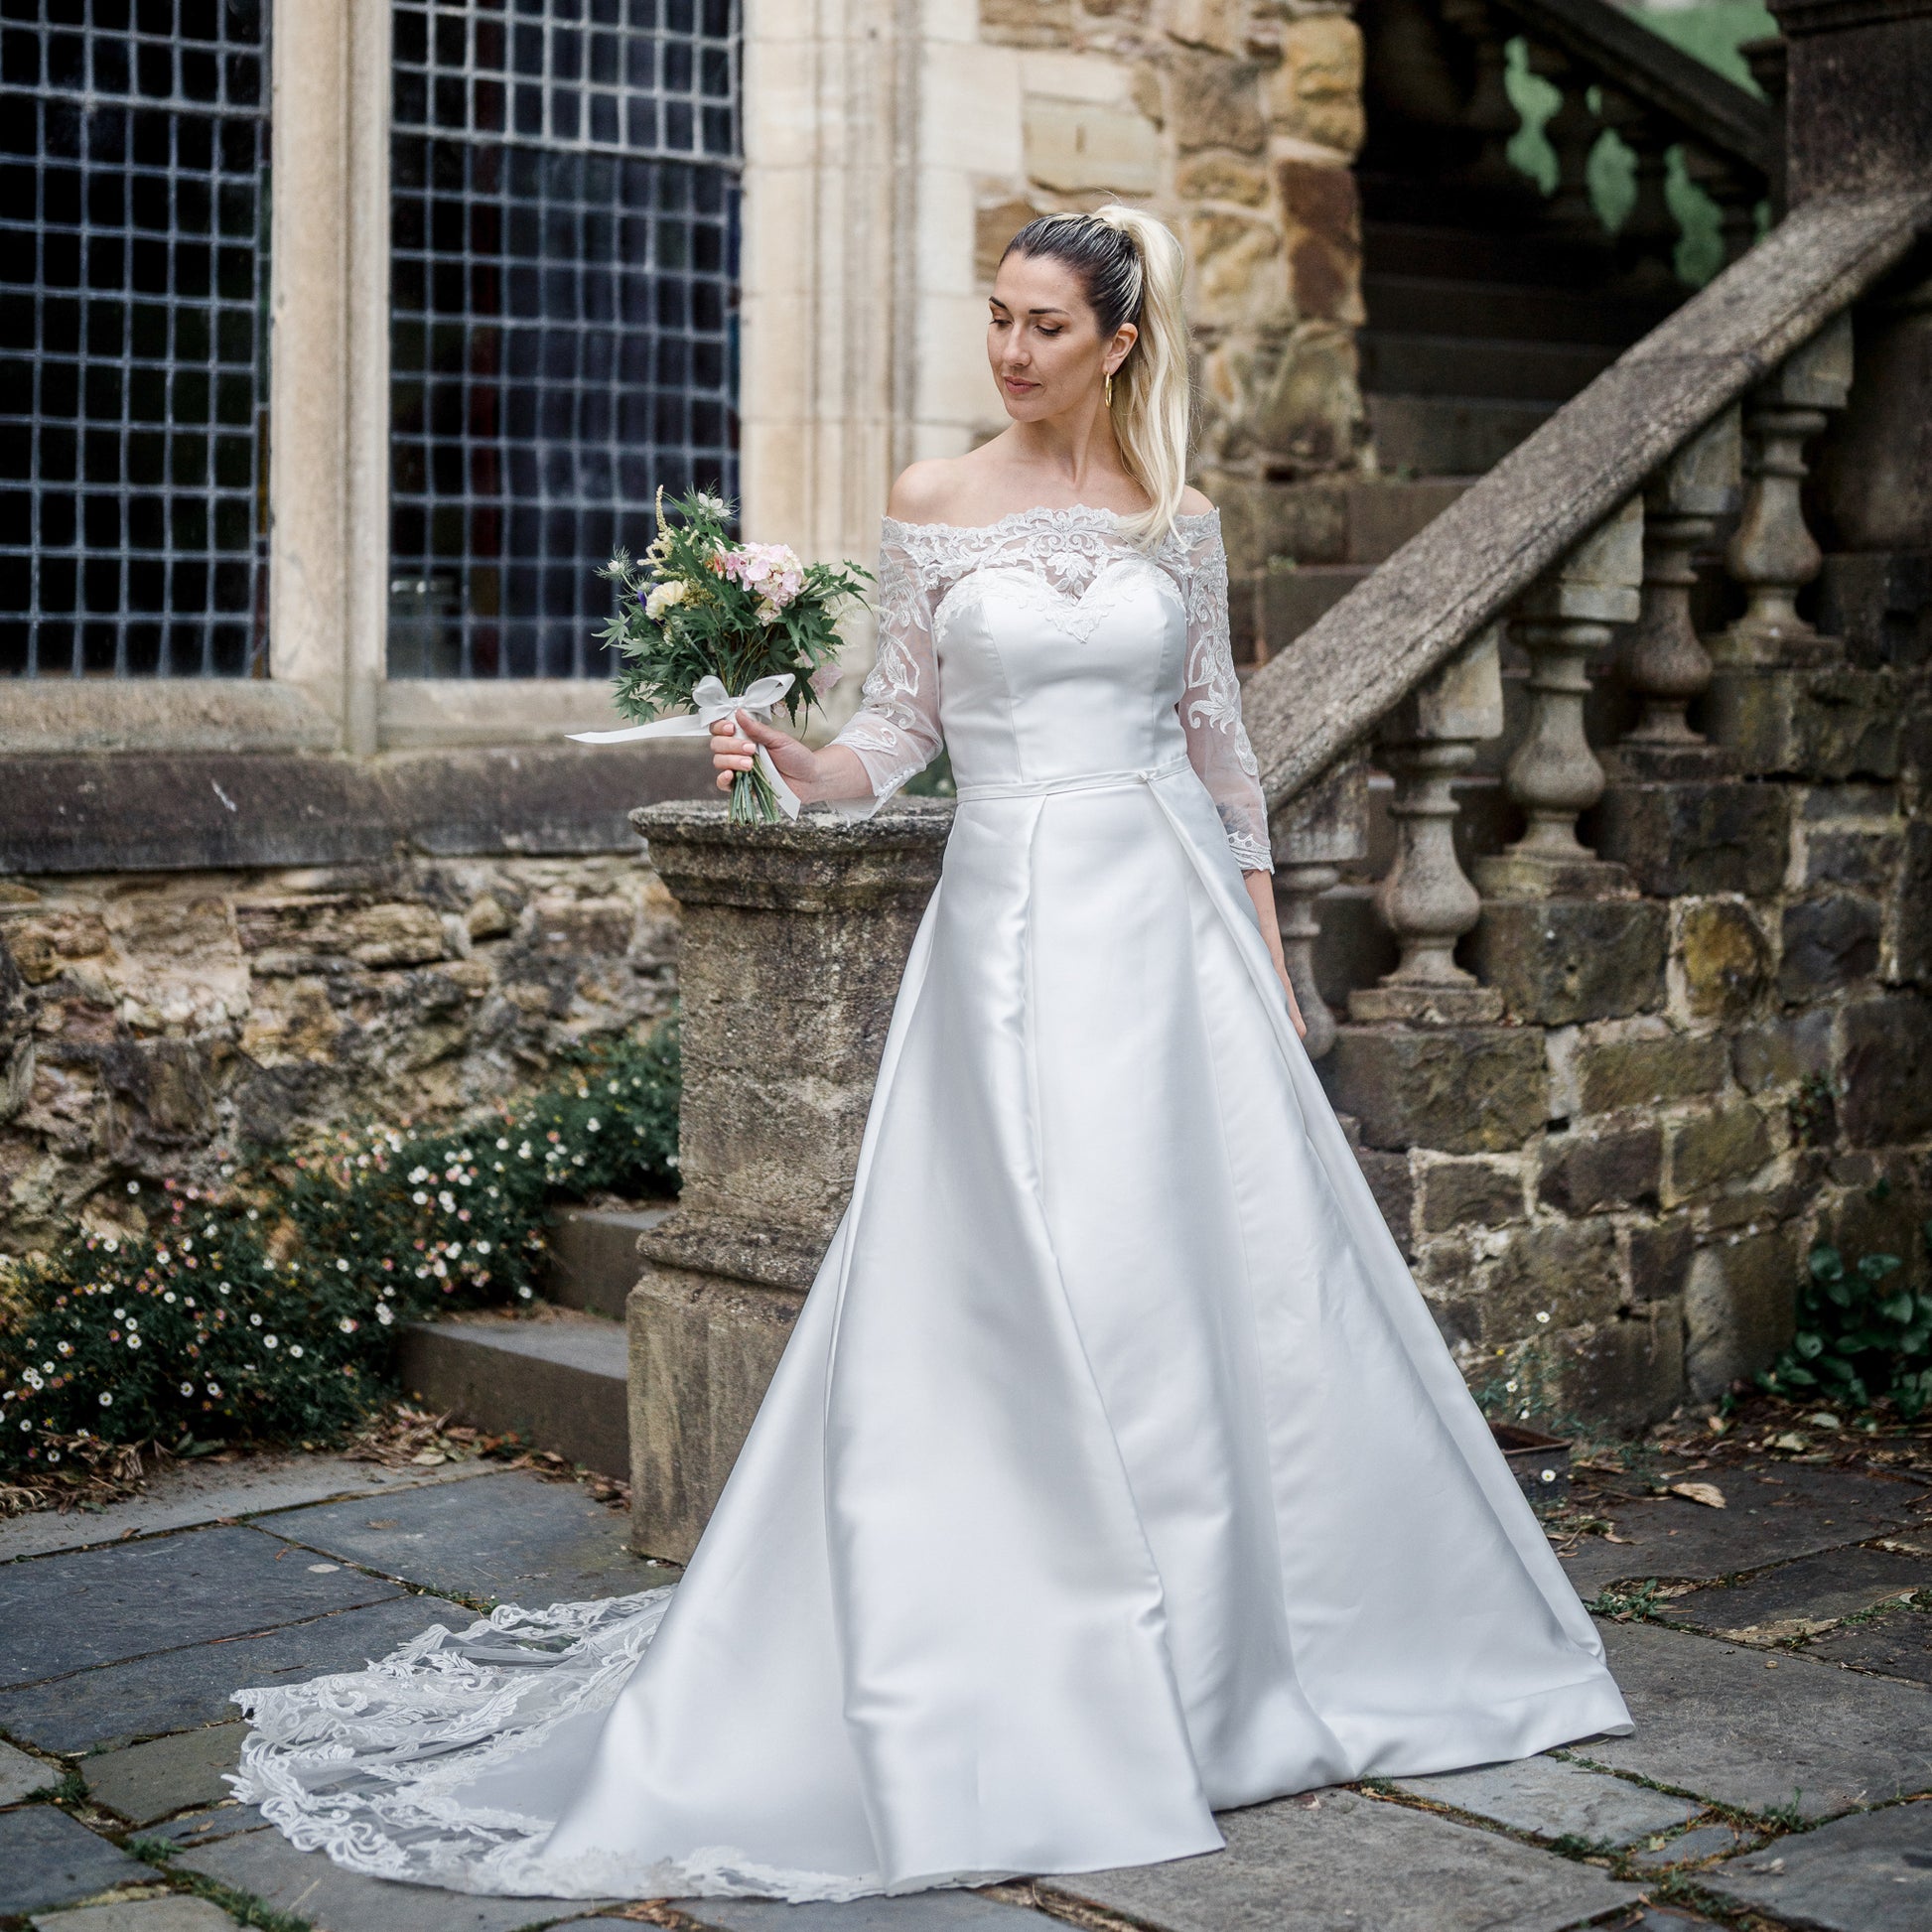 Summer wedding dress with a lace-adorned sweetheart neckline, detachable sleeves, and a flowing train.